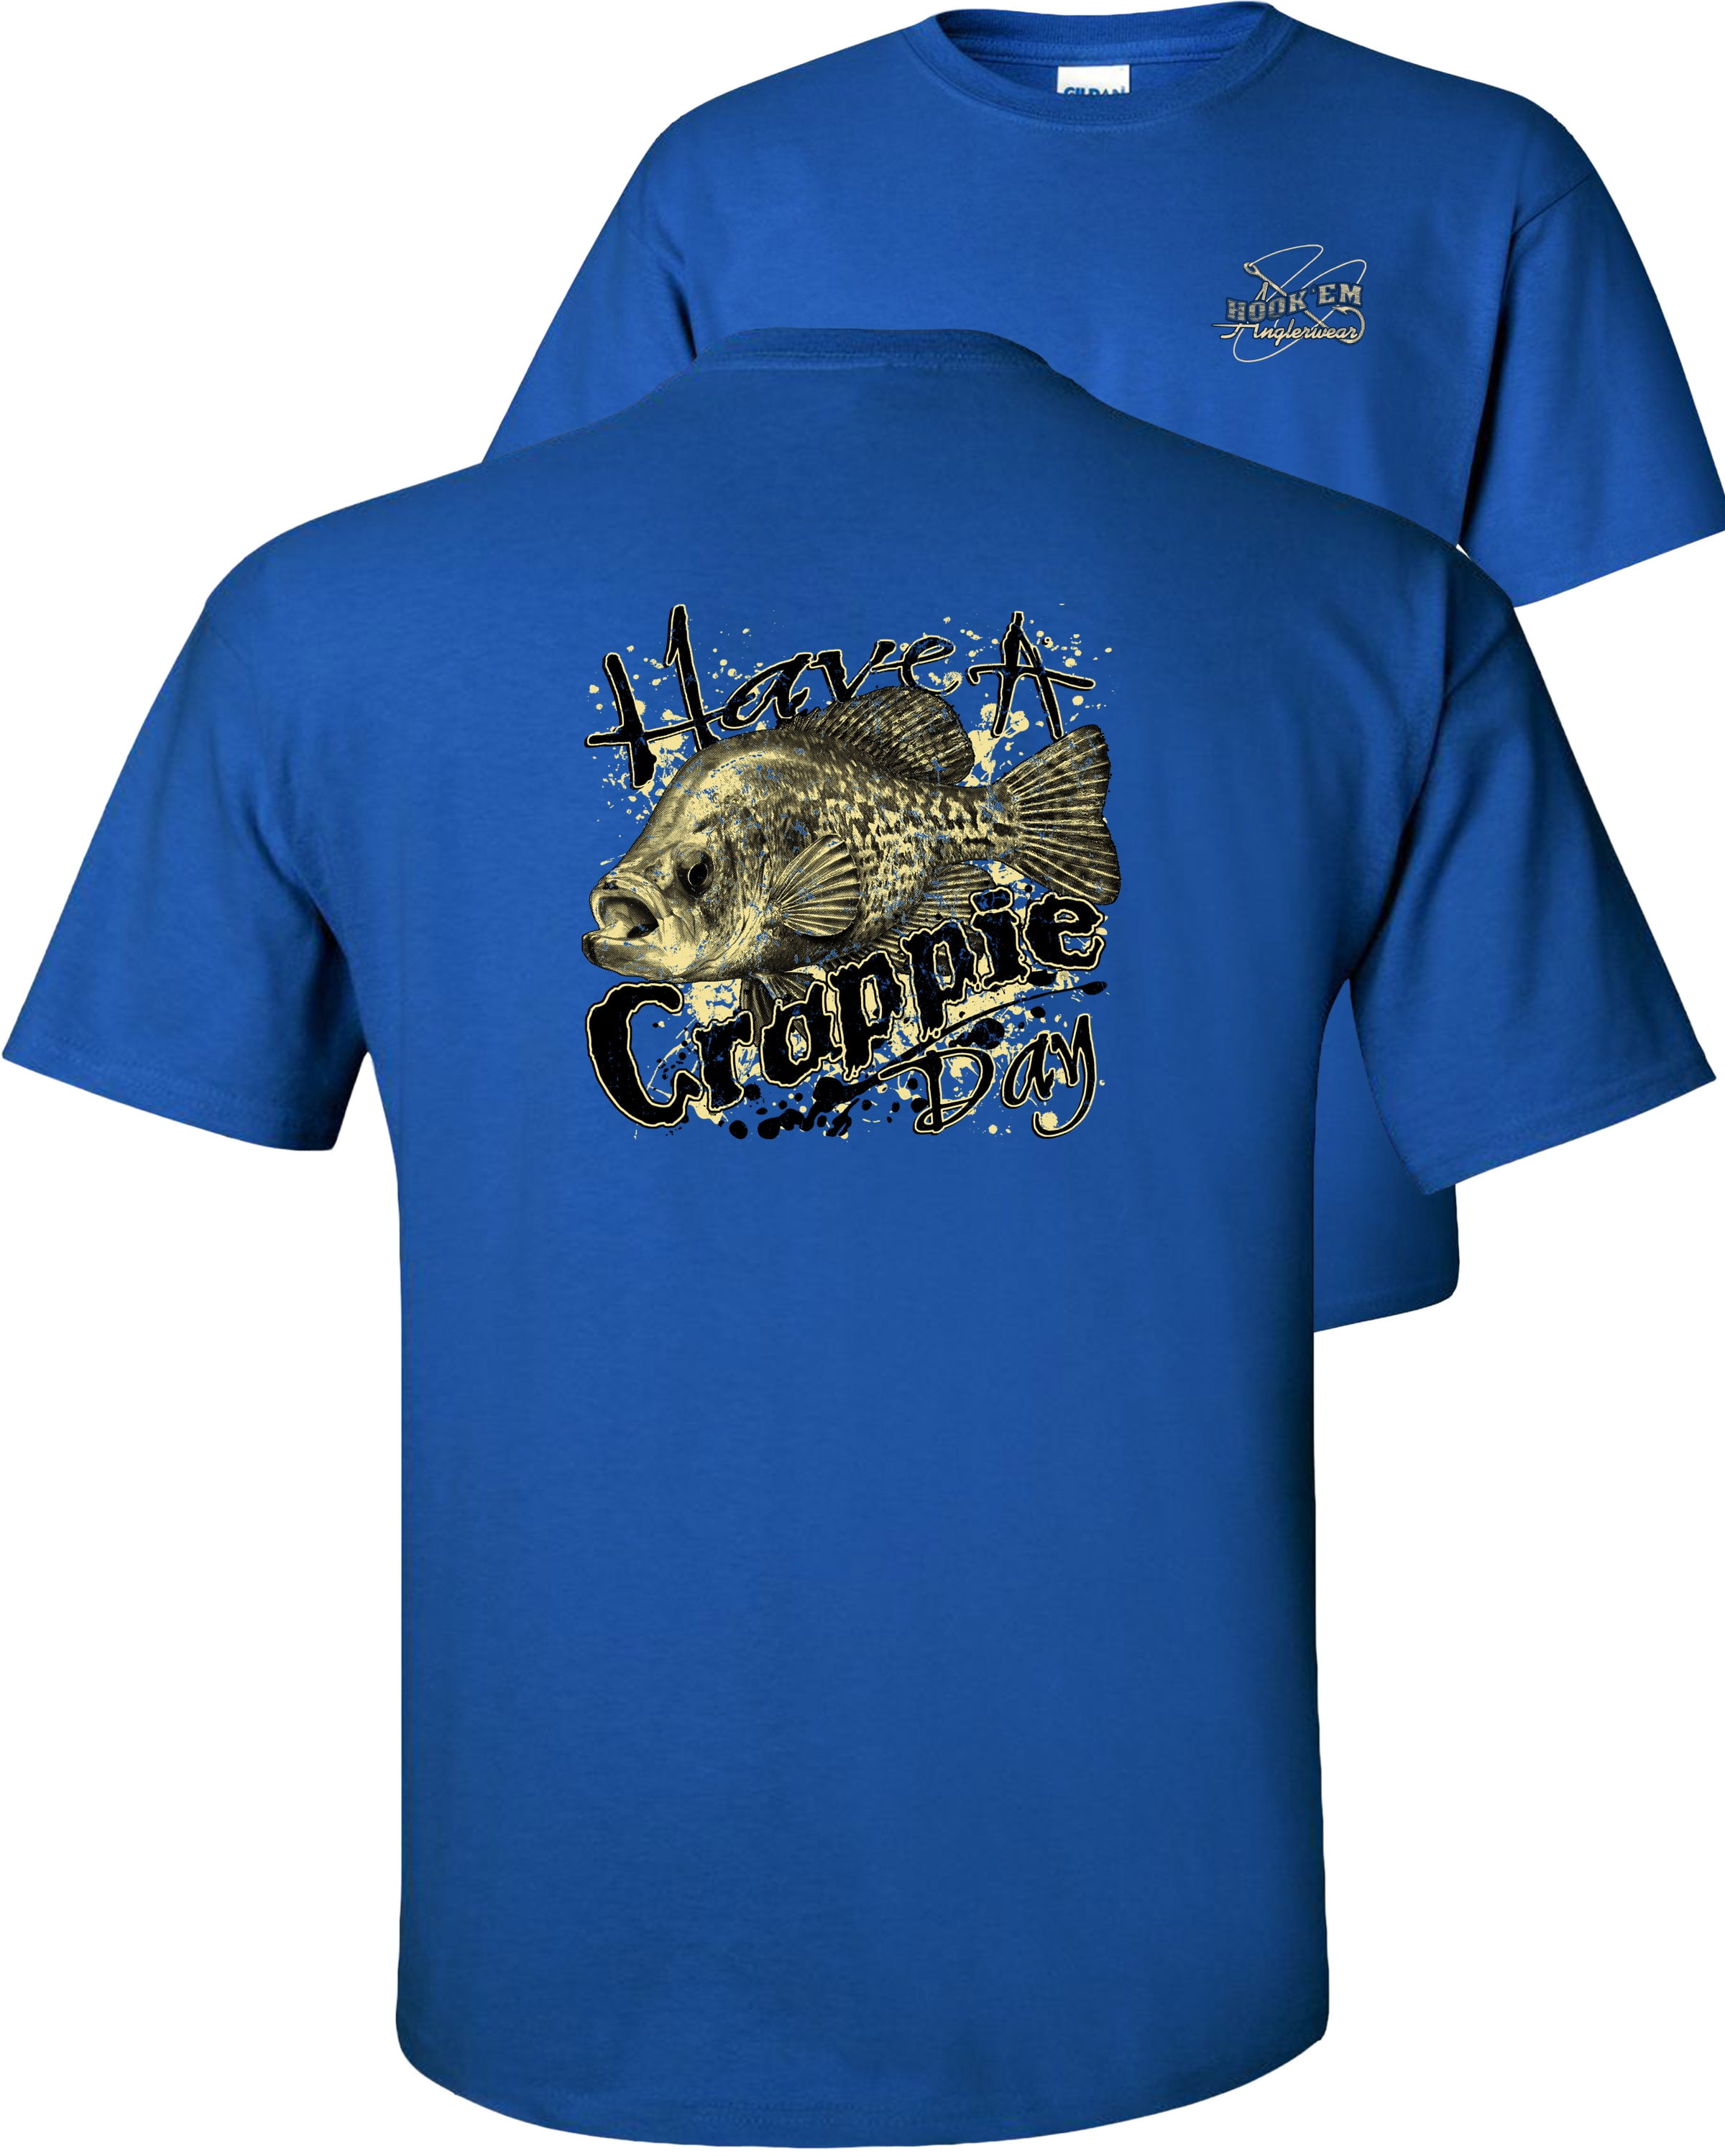 Fair Game Have a Crappie Day T-Shirt, Fishing Graphic Tee-Royal-L 